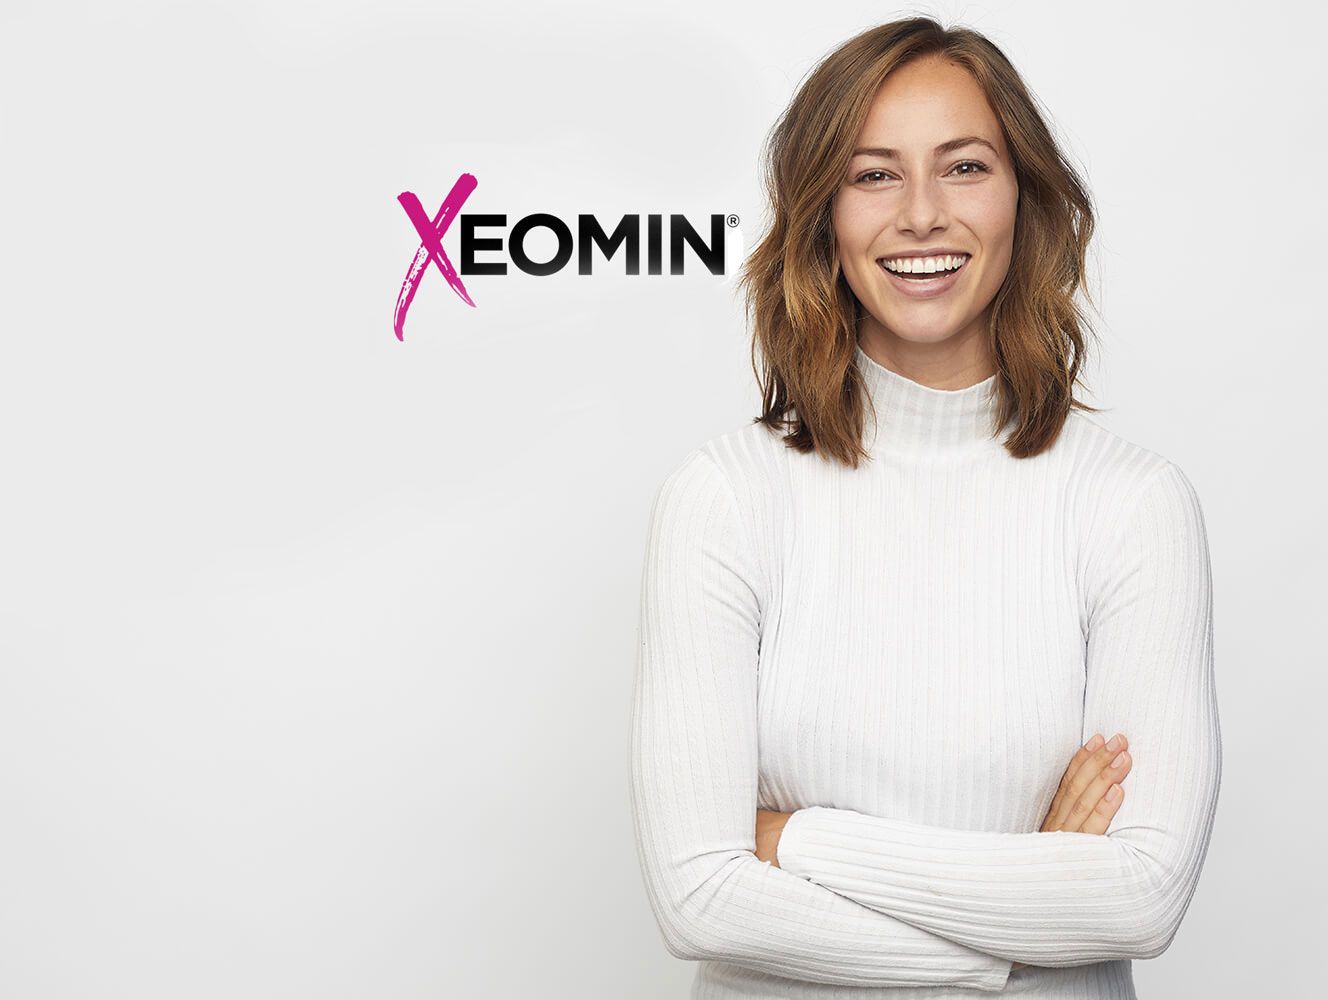 Xeomin to eliminate crows feet and forehead wrinkles